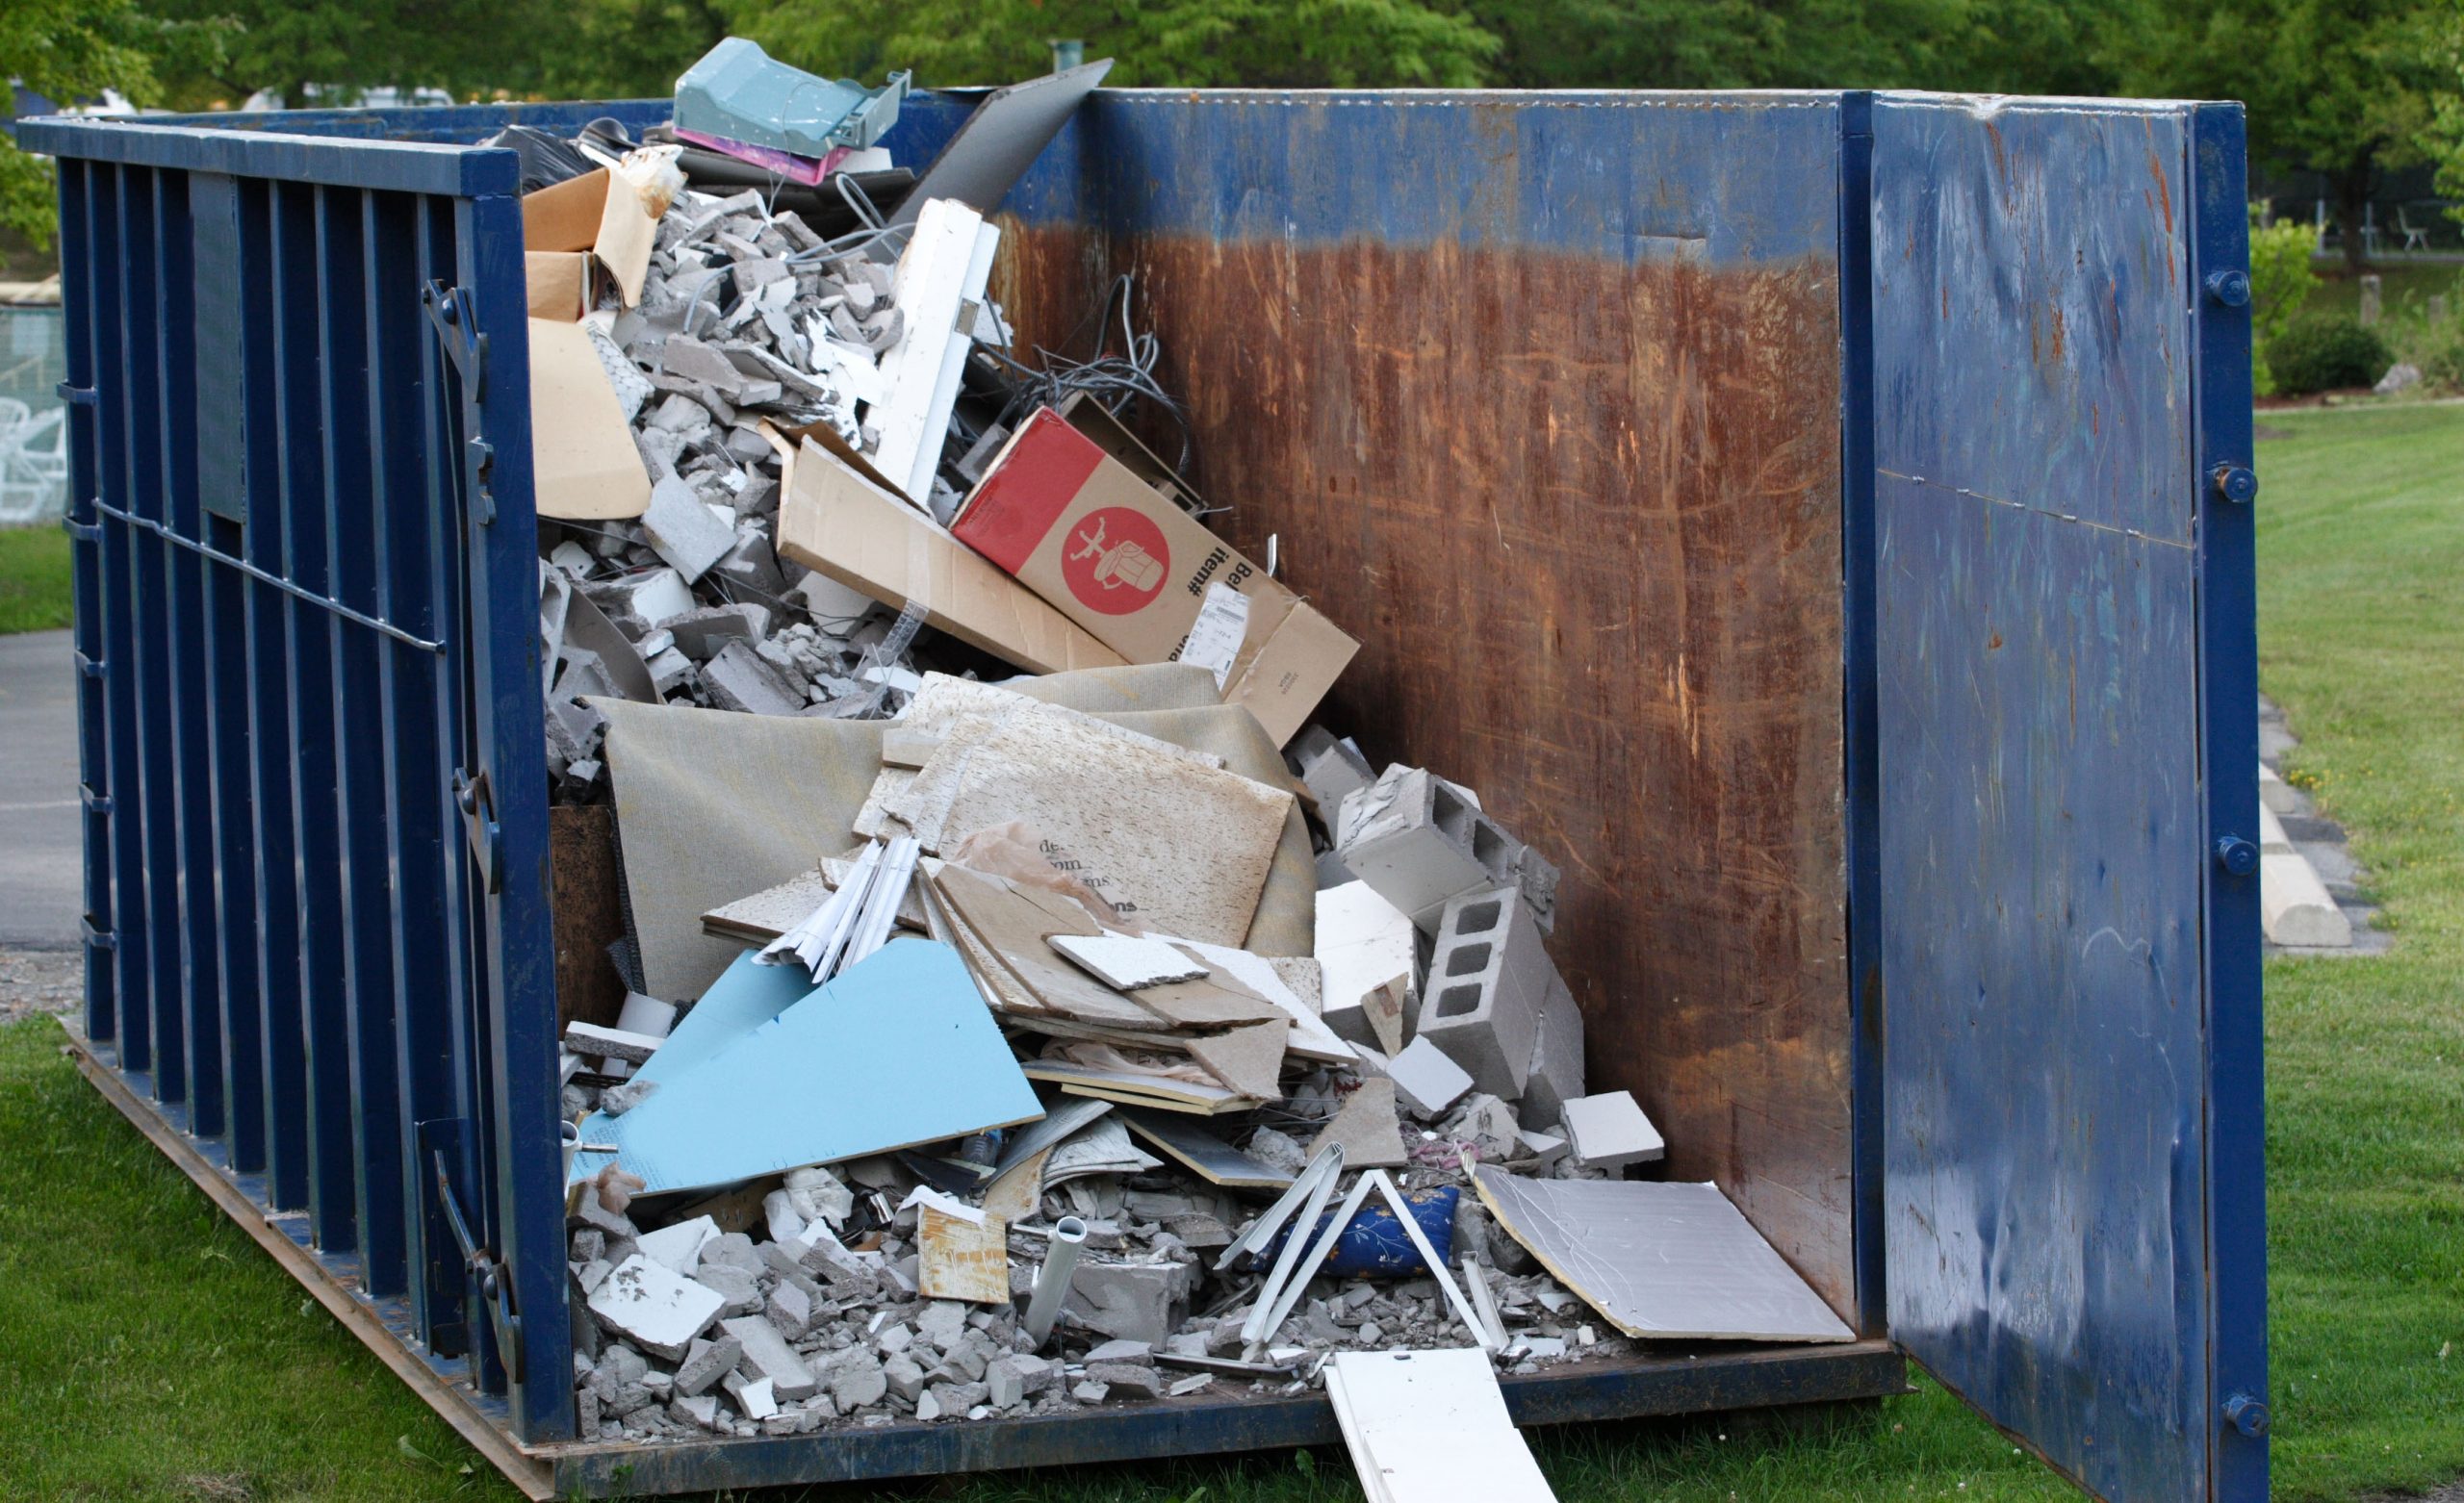 How to Choose a Dumpster for a Home Renovation Project